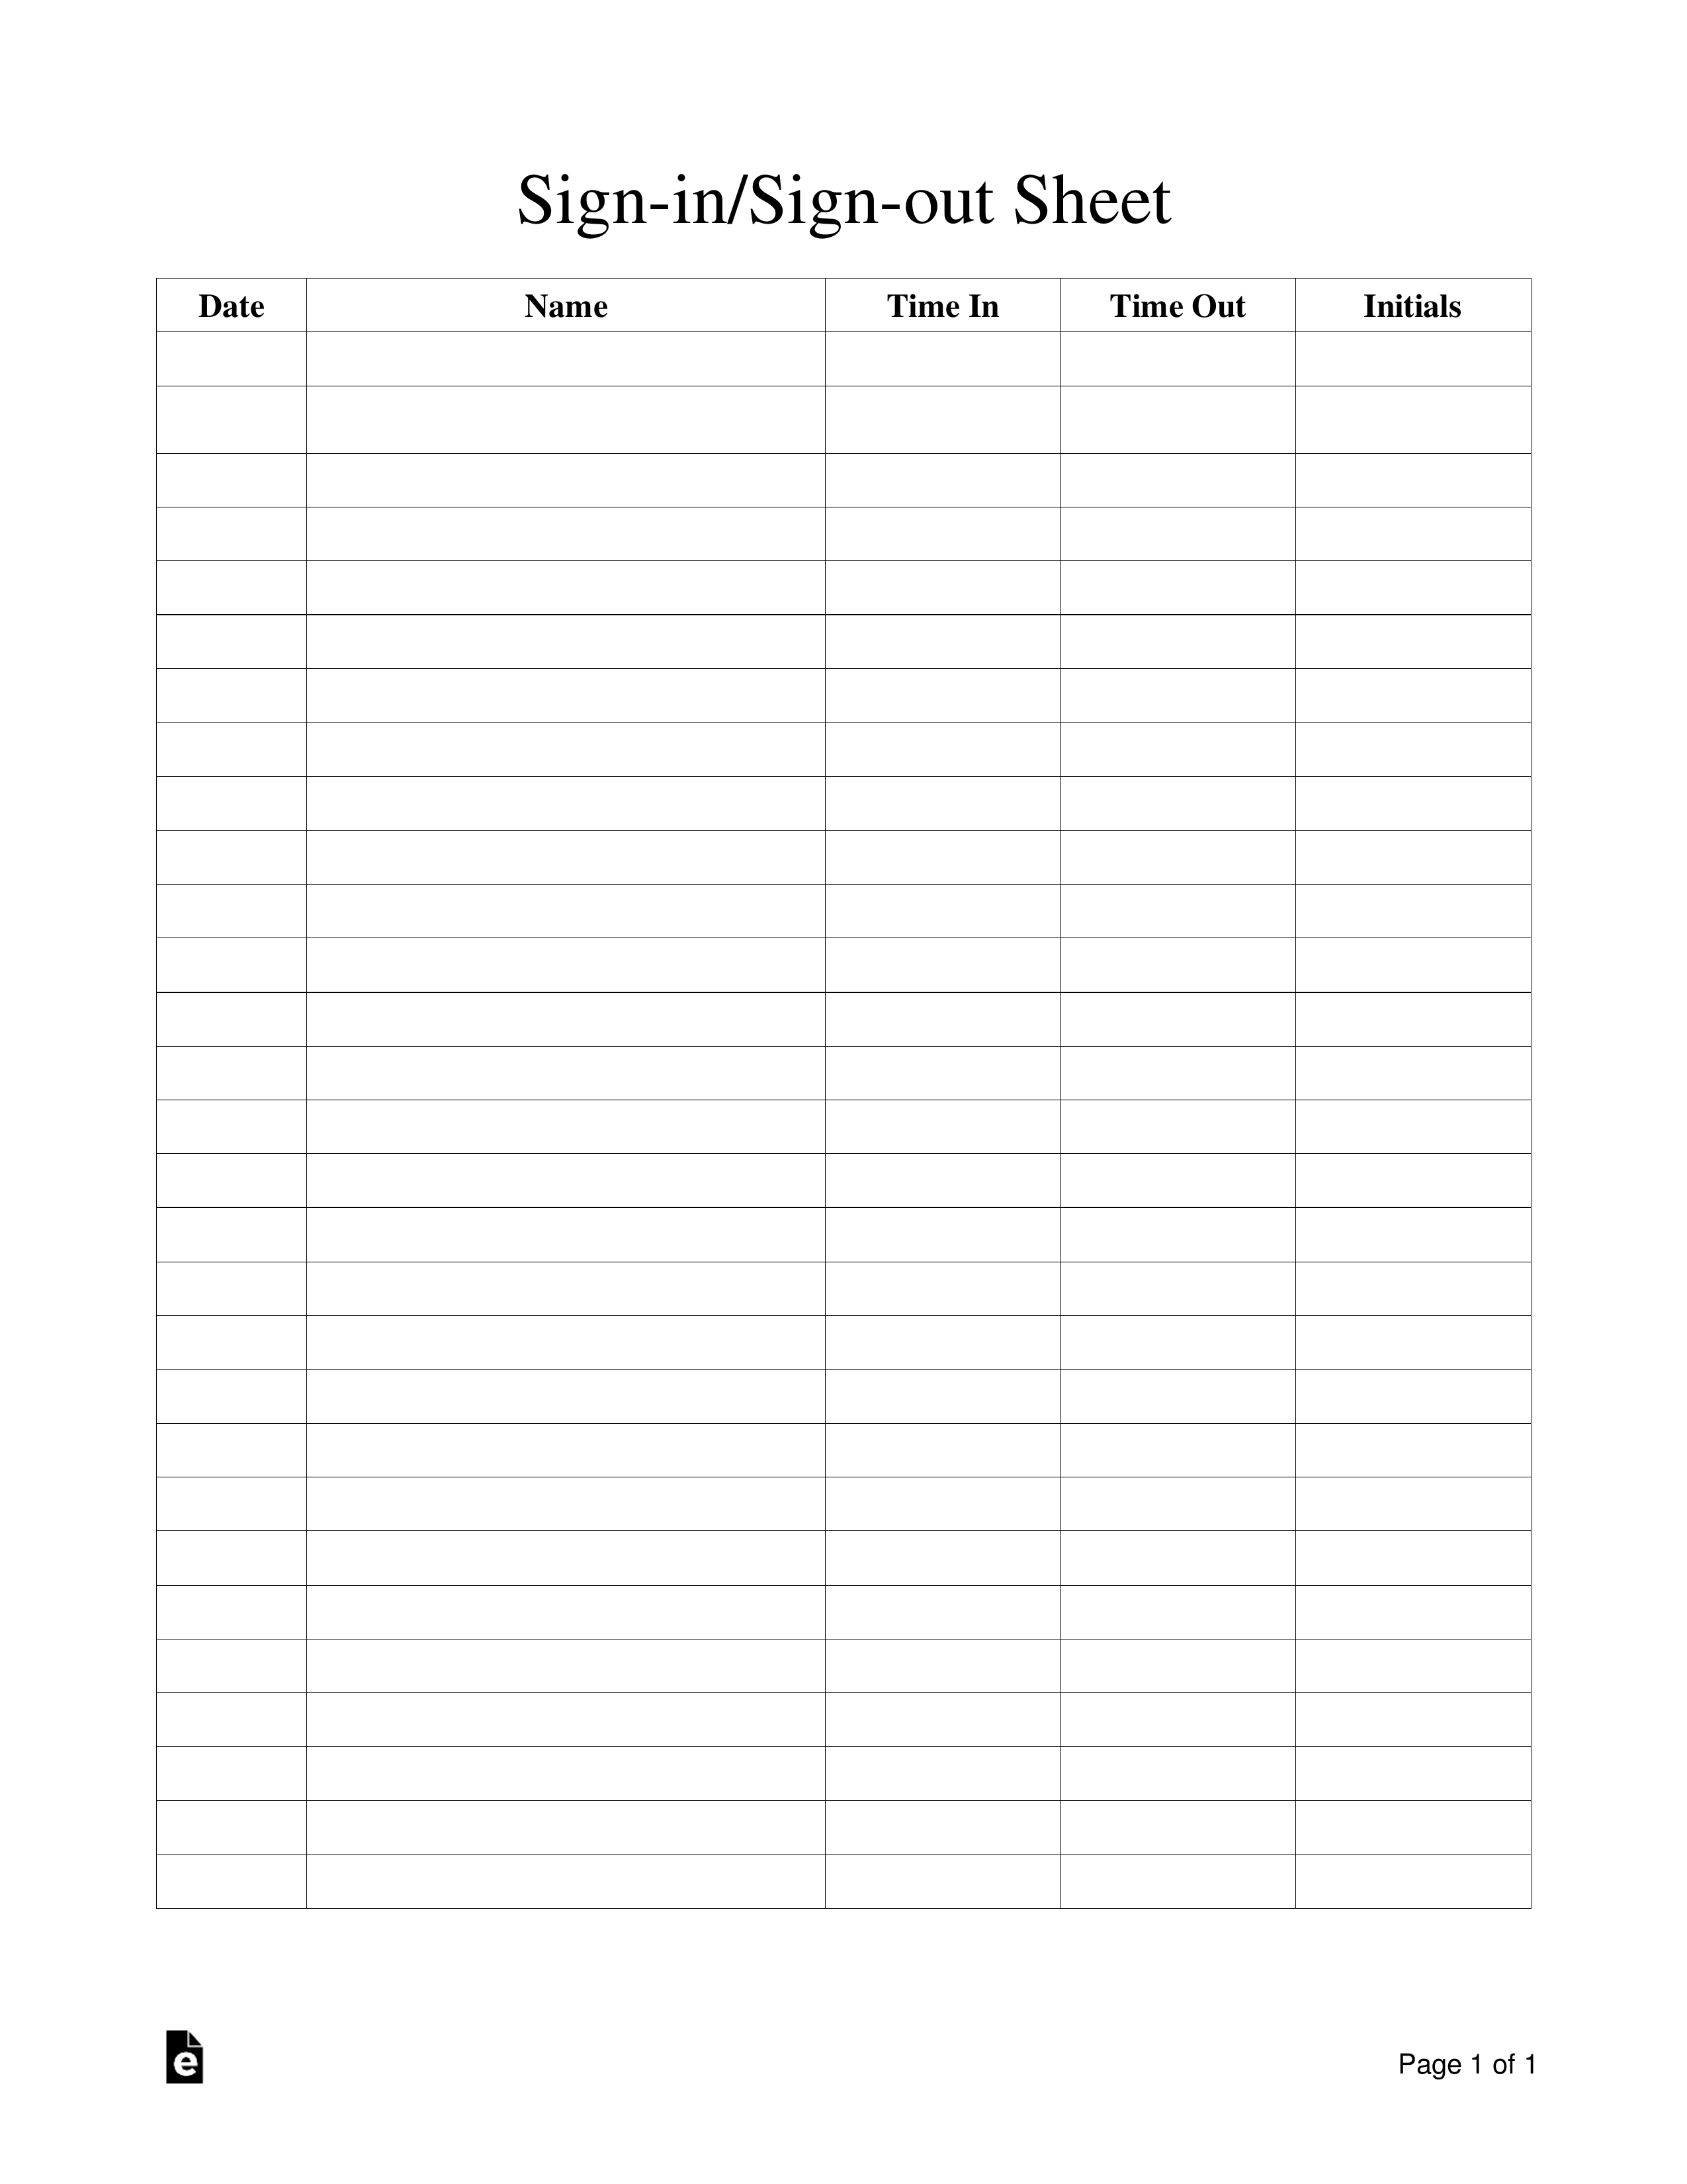 Sign Up Sheet Template Pdf from eforms.com